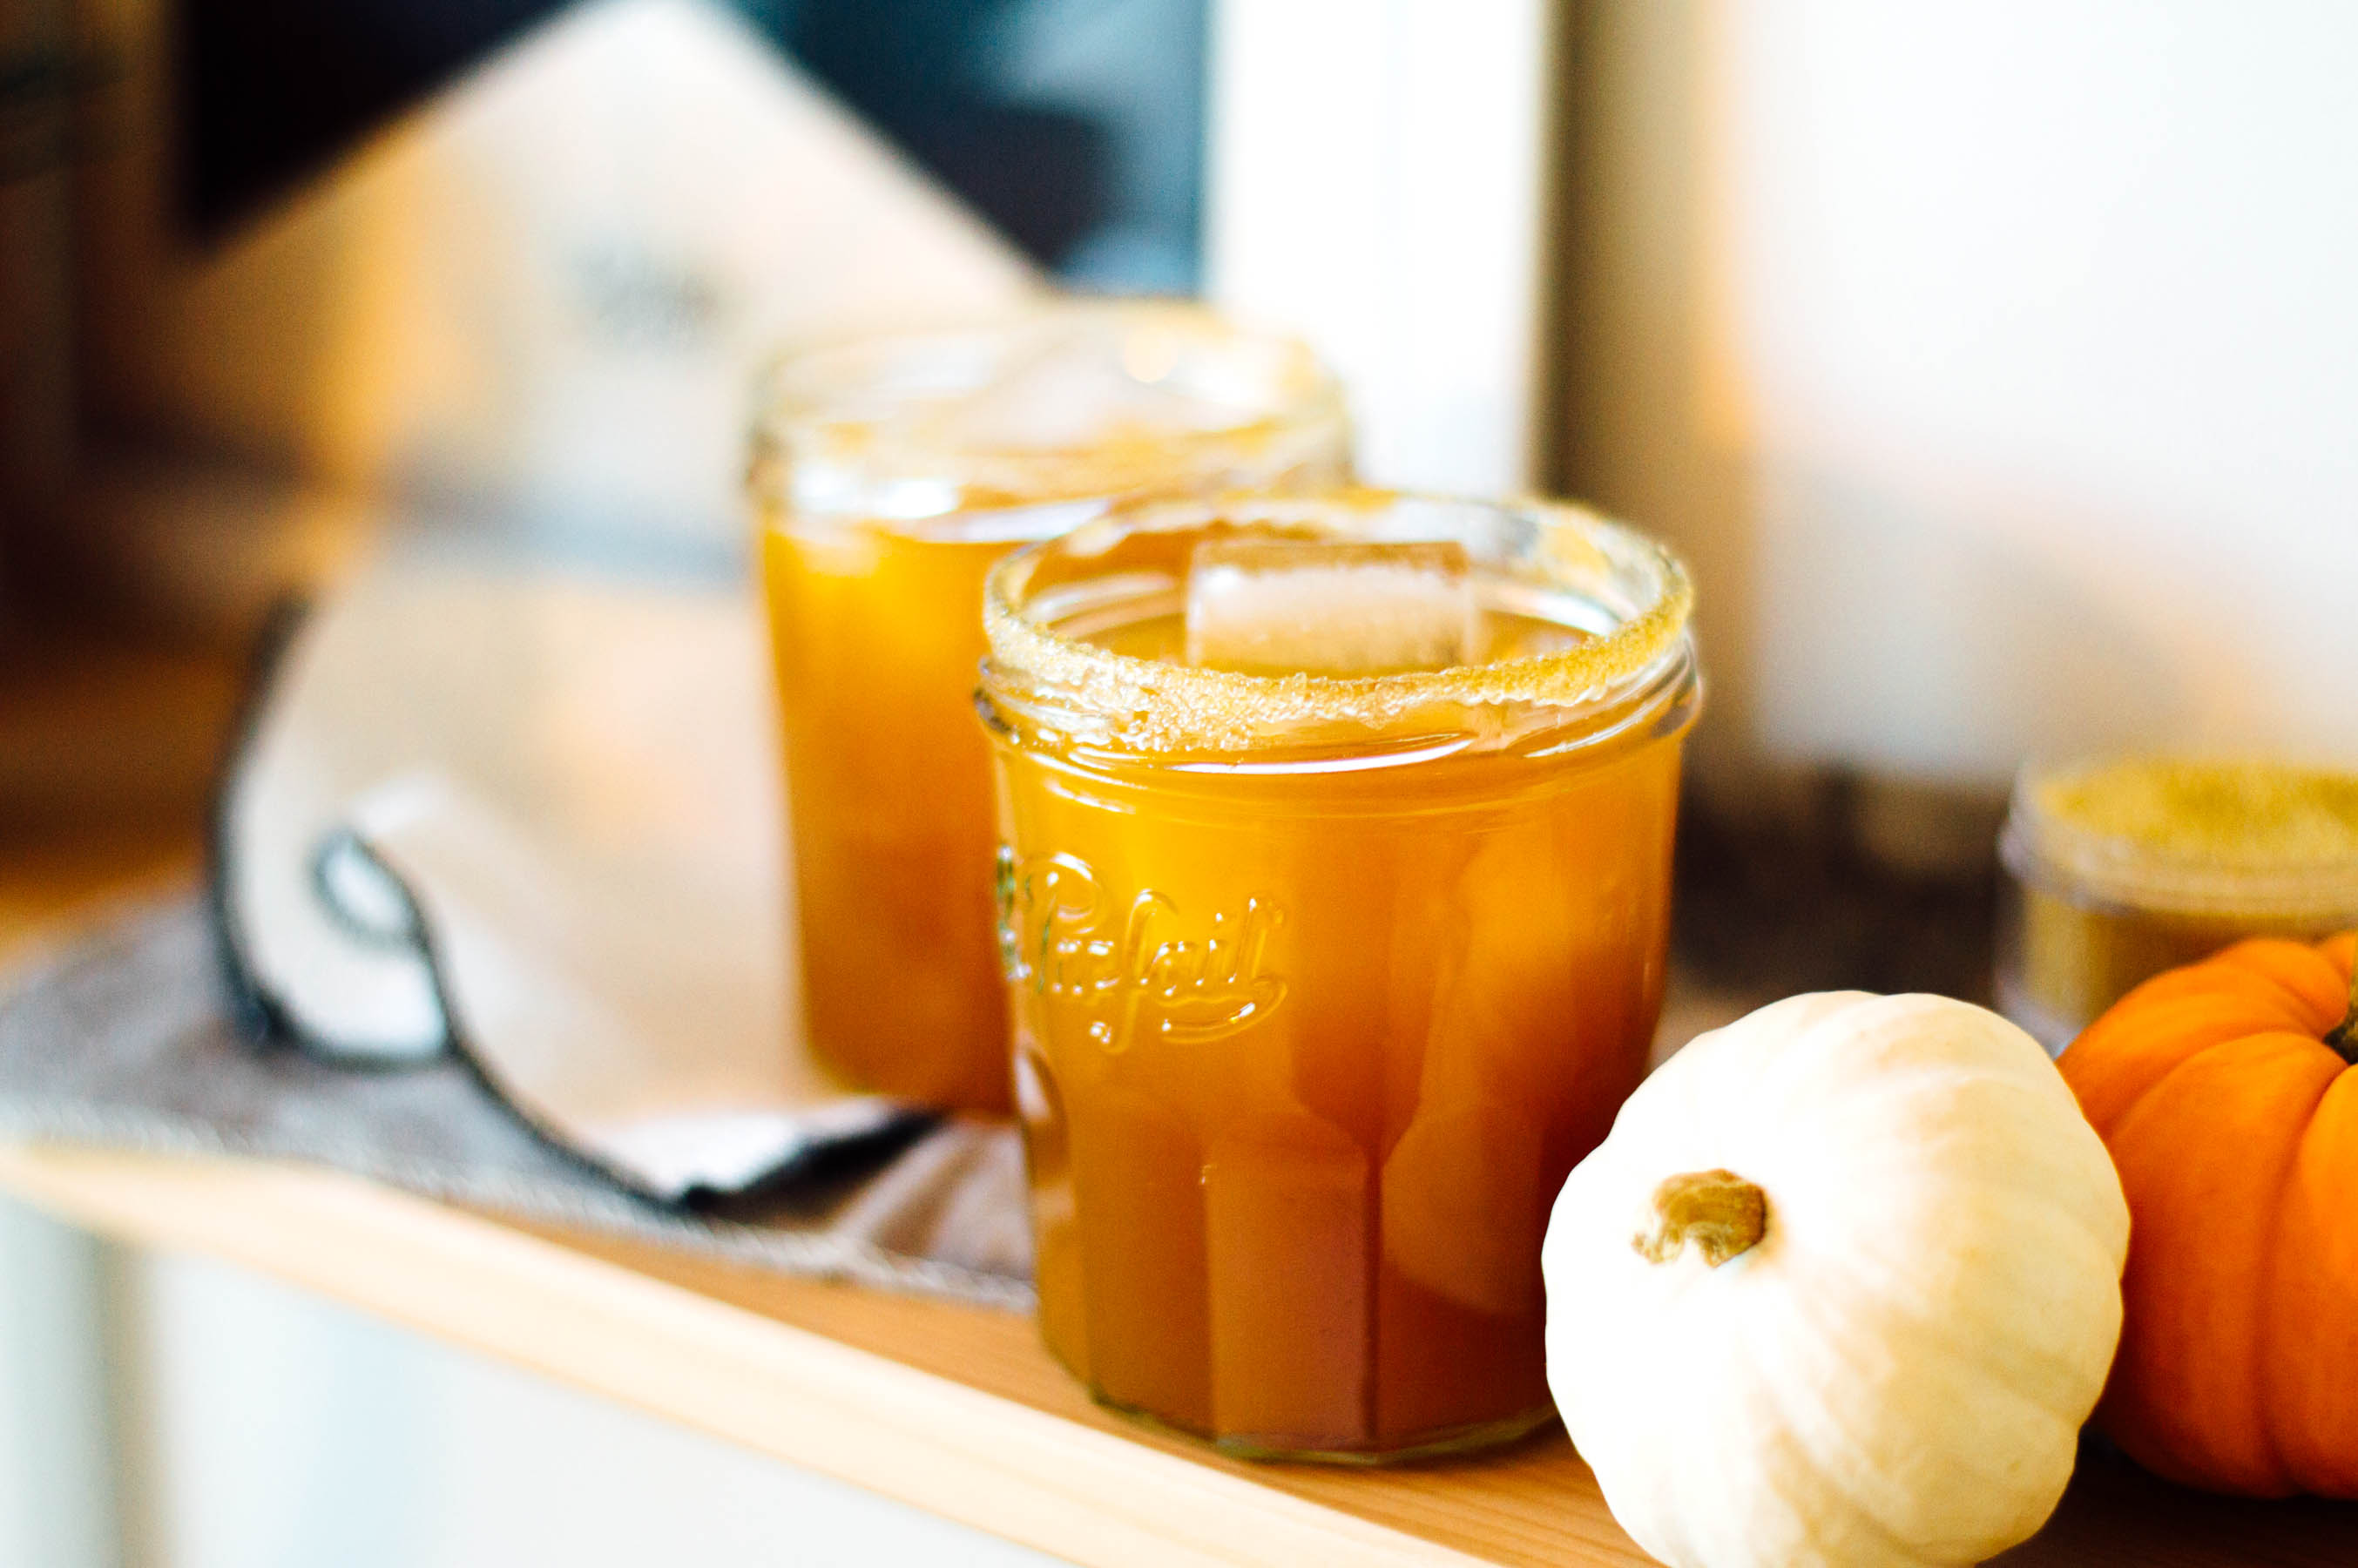 Into fall cocktails? Try this Spiked Pumpkin Spice Apple Cider for National Pumpkin Day! | bygabriella.co